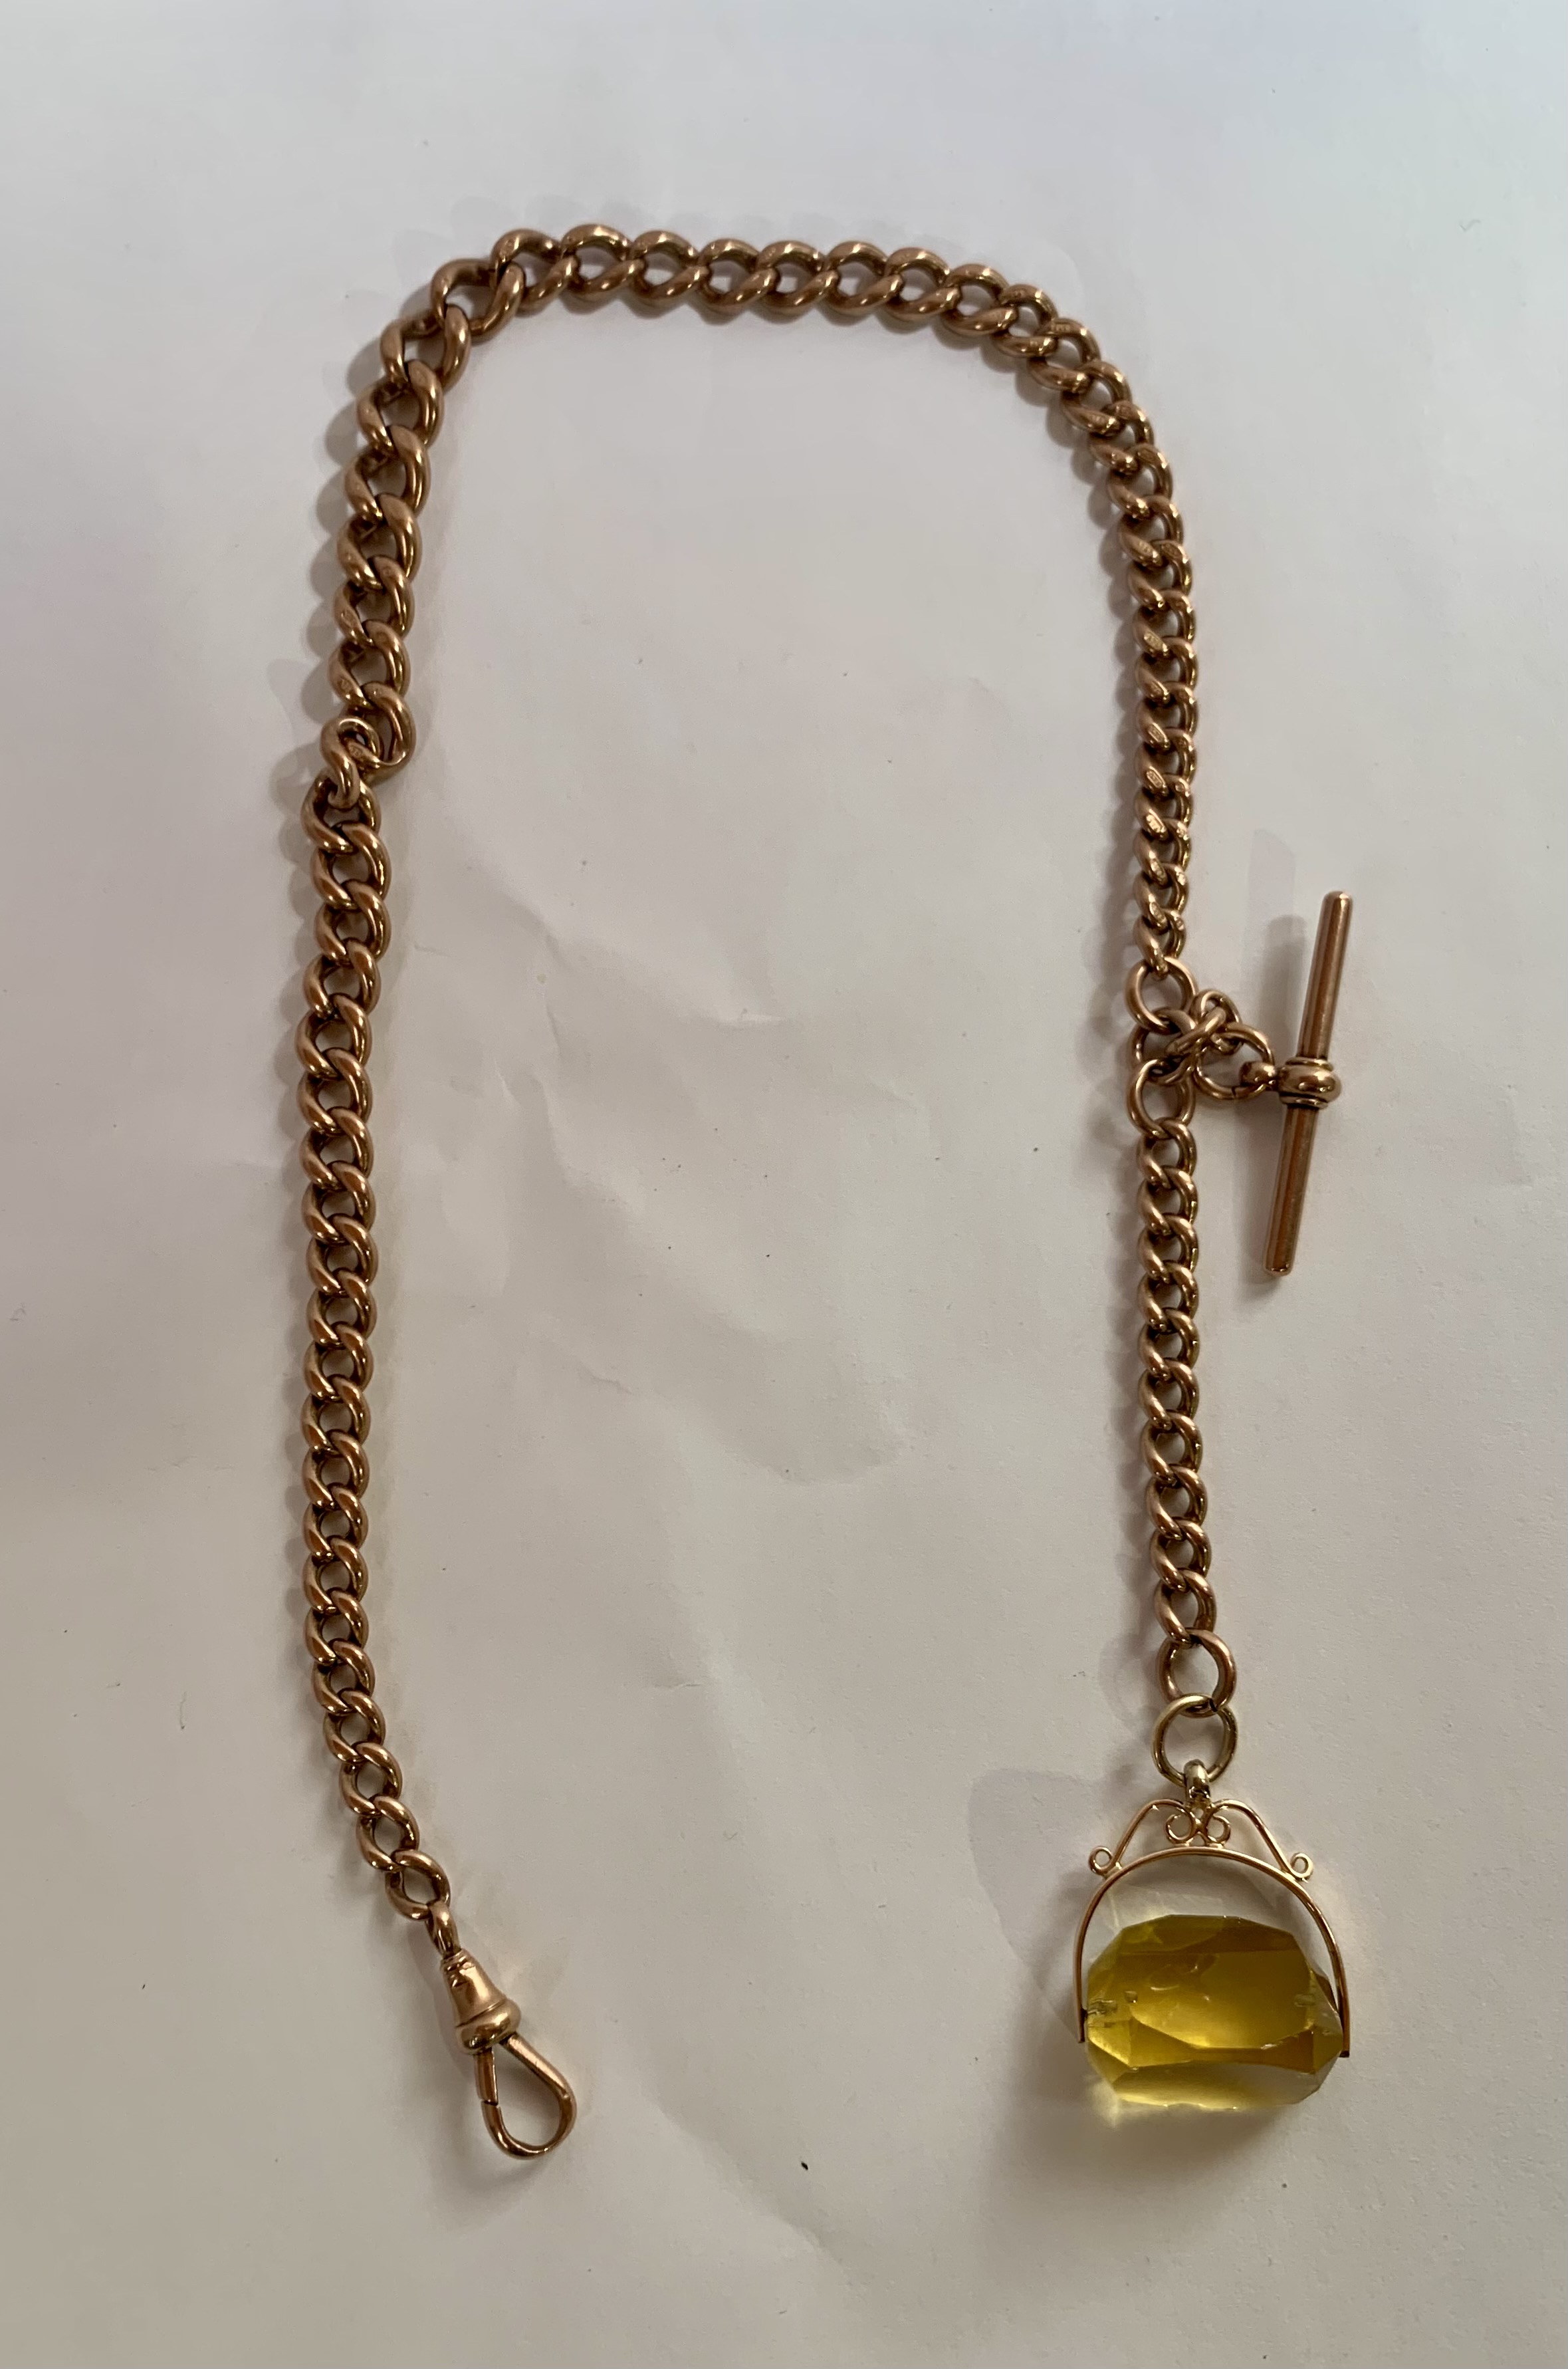 9k gold link necklace with bar and yellow stone fob pendant, total weight 63.37 grams, length of